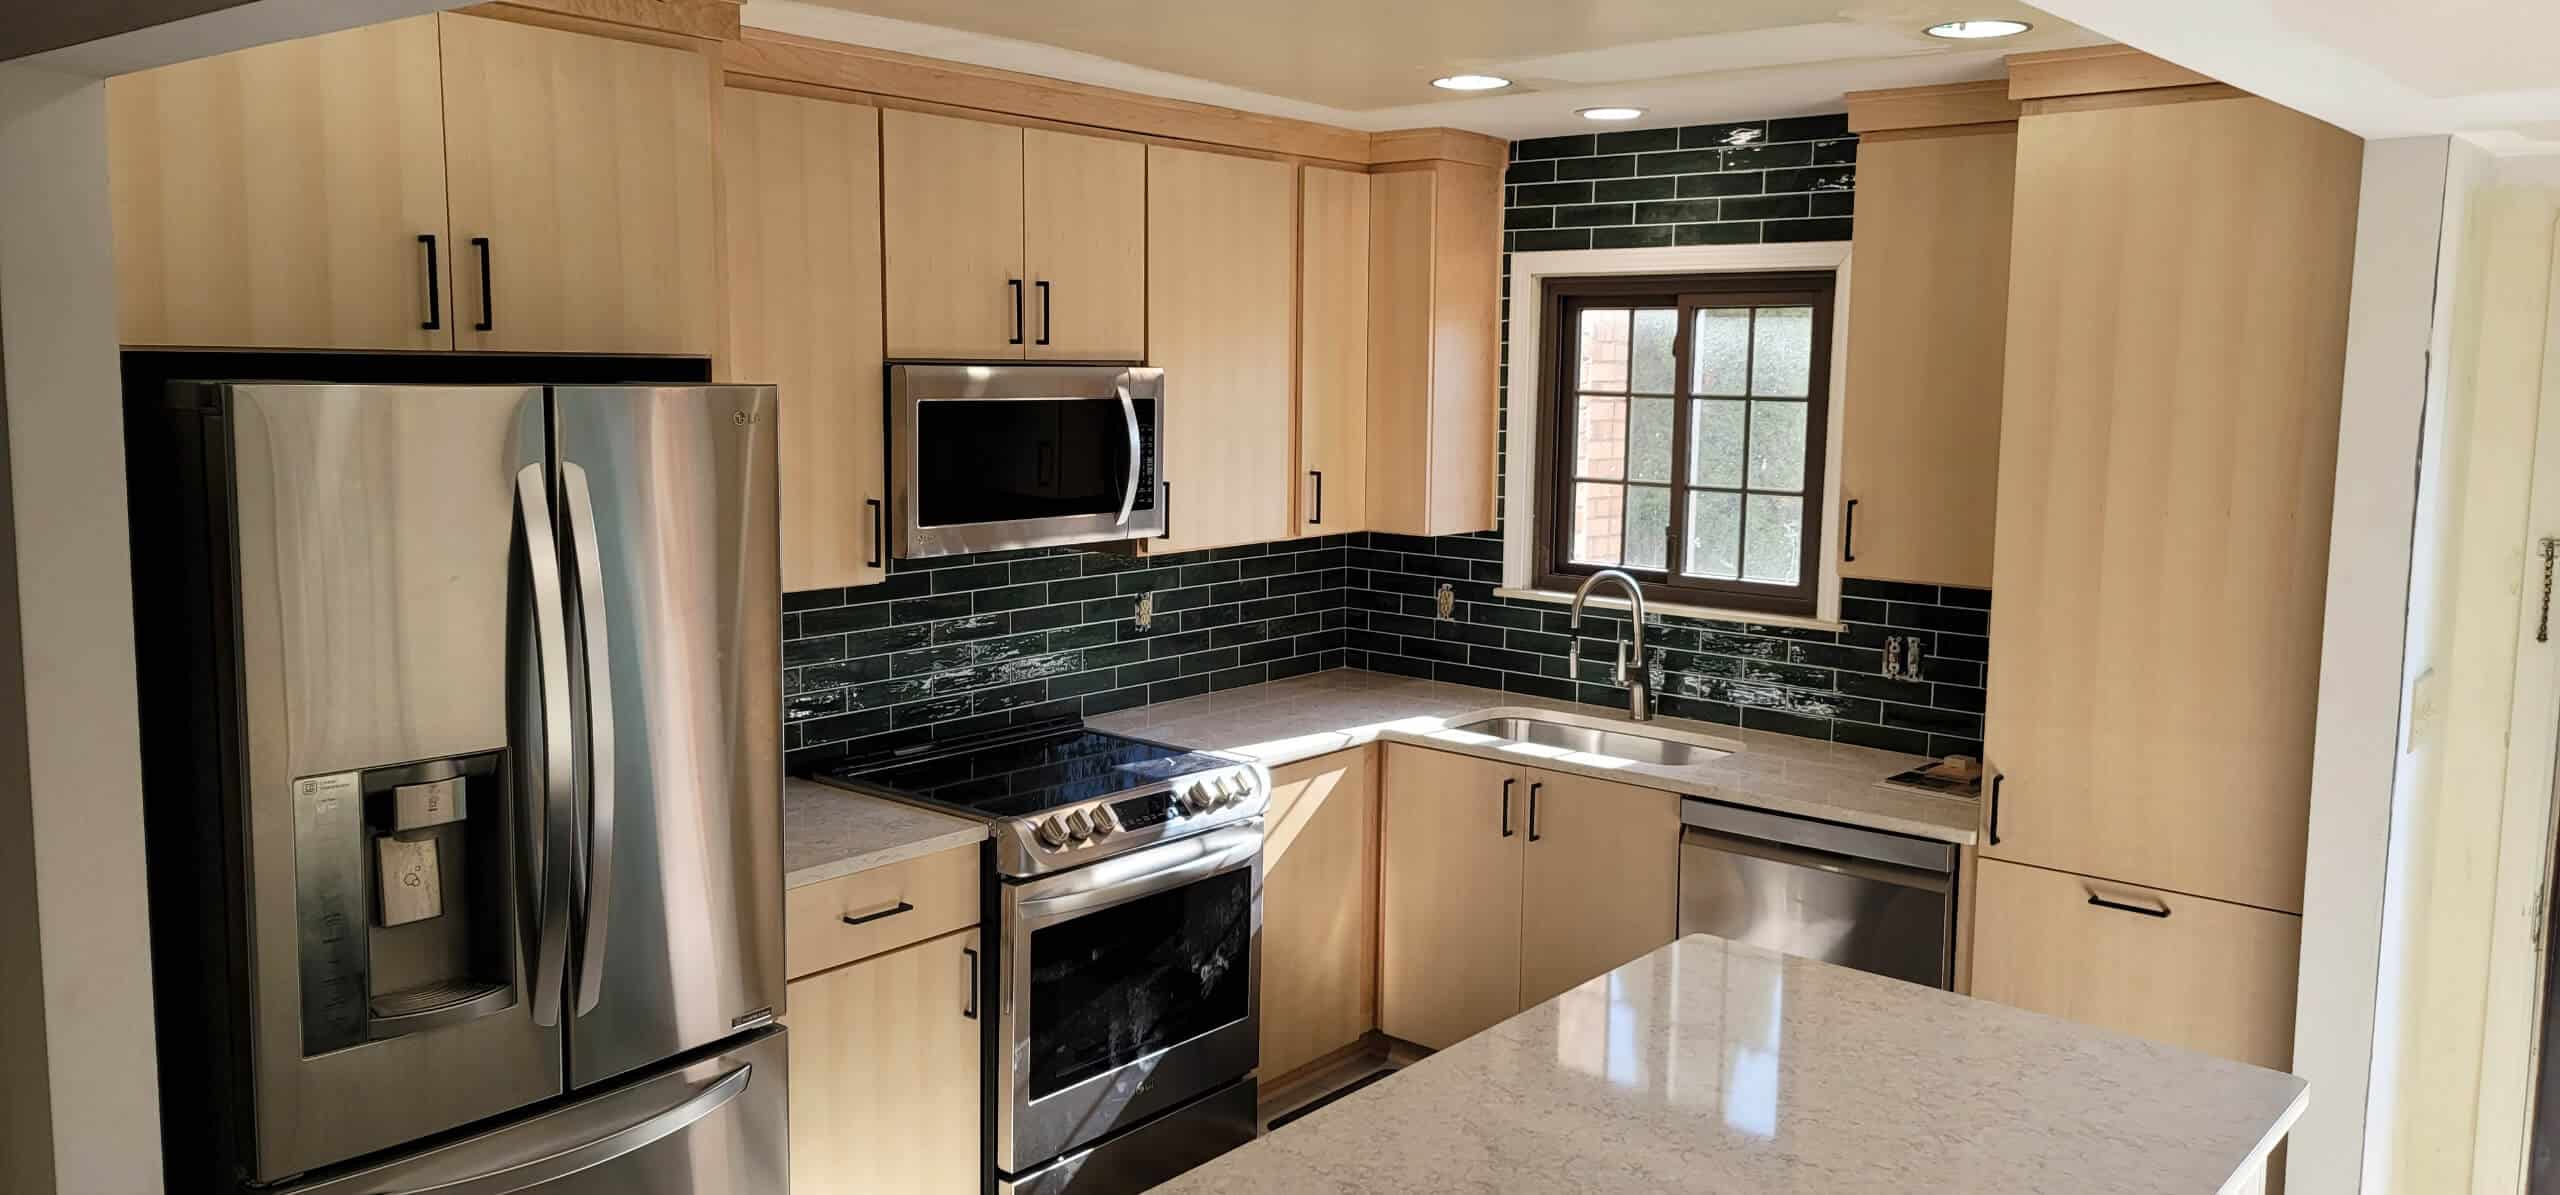 Indianapolis Home Remodeling Contractors - remodeled kitchen with black tile in Carmel, Indiana